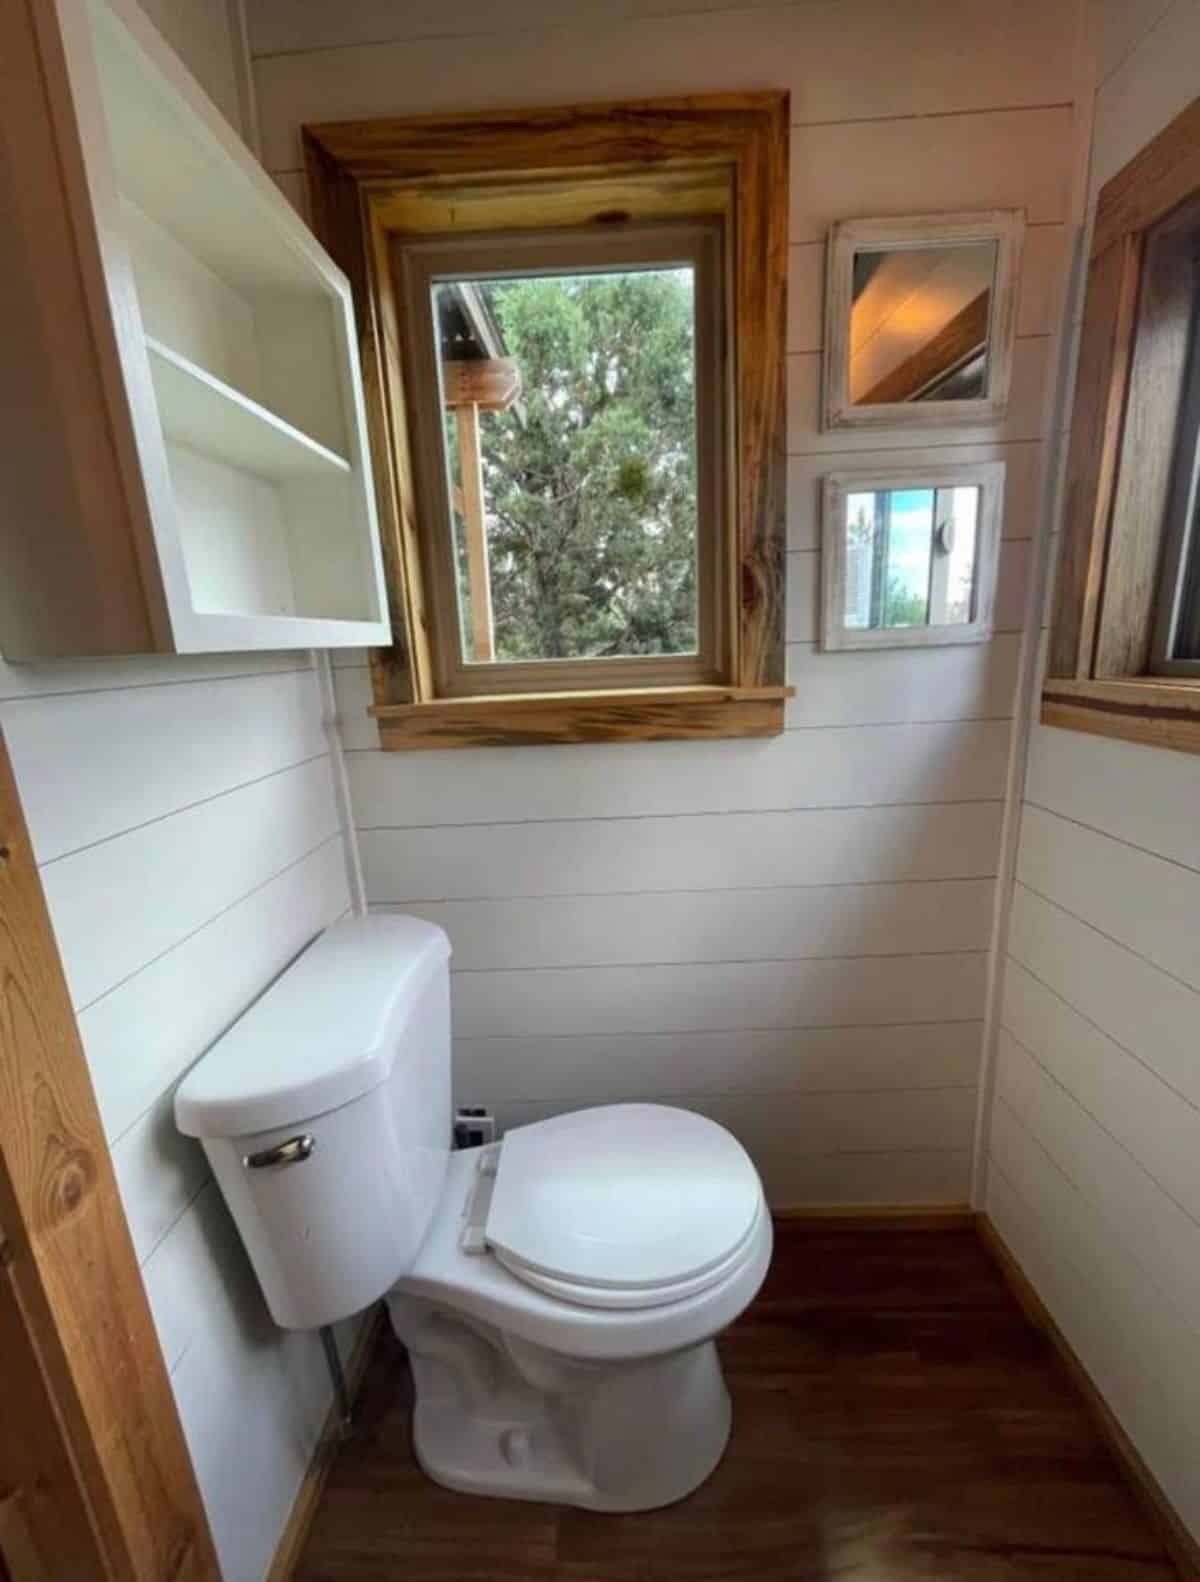 standard toilet in bathroom of 23’ tiny house